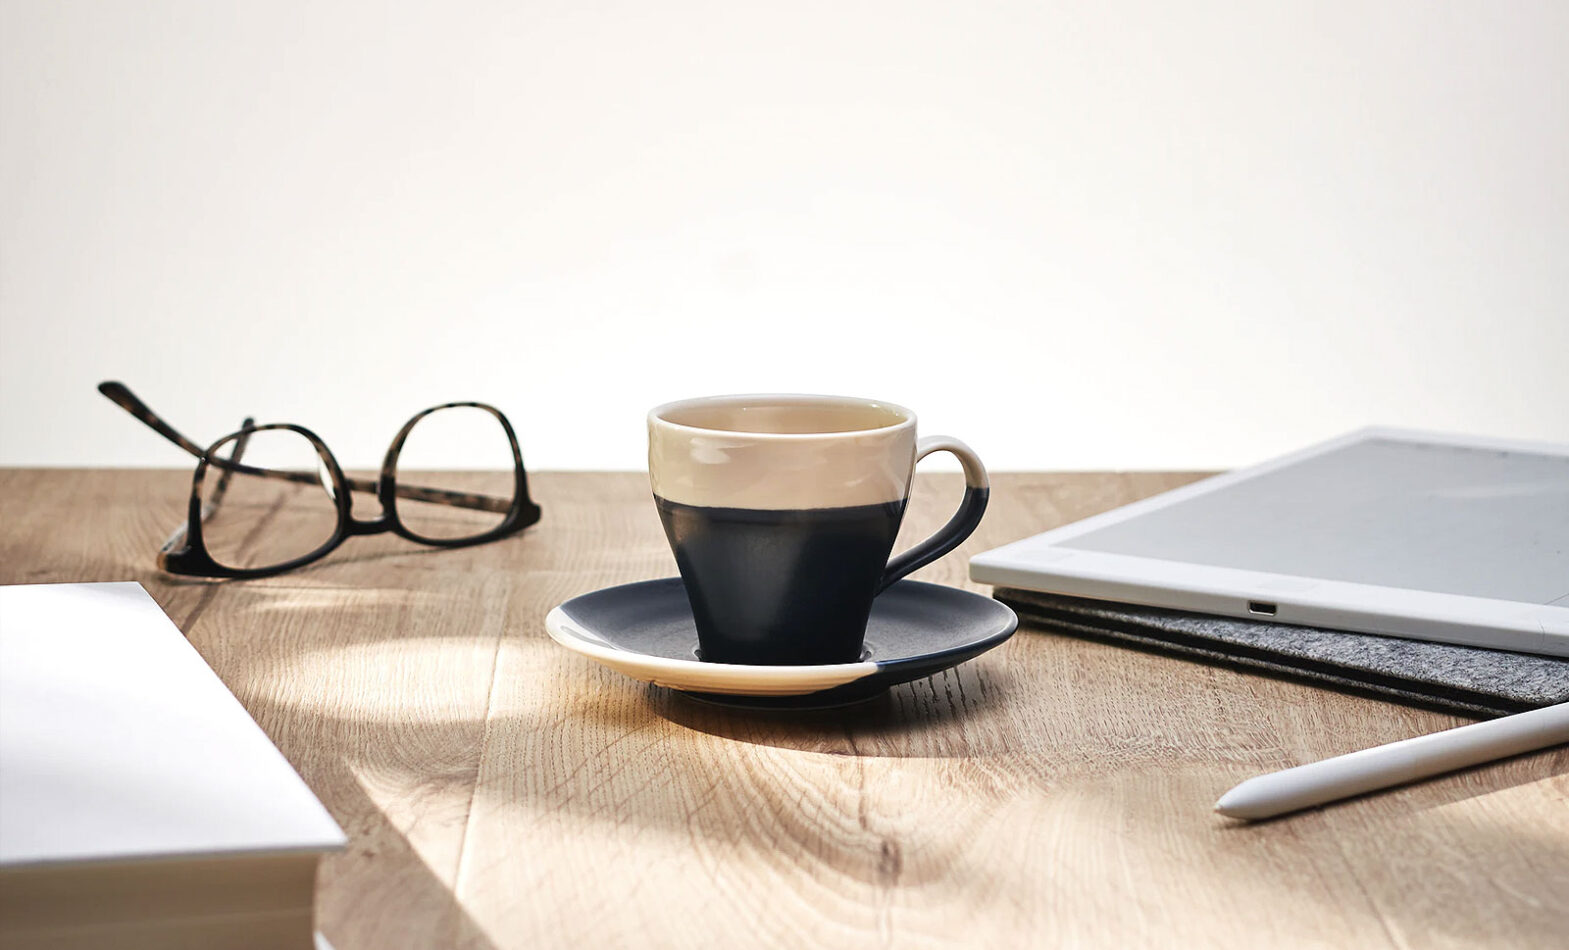 A mug and saucer next to a tablet and glasses